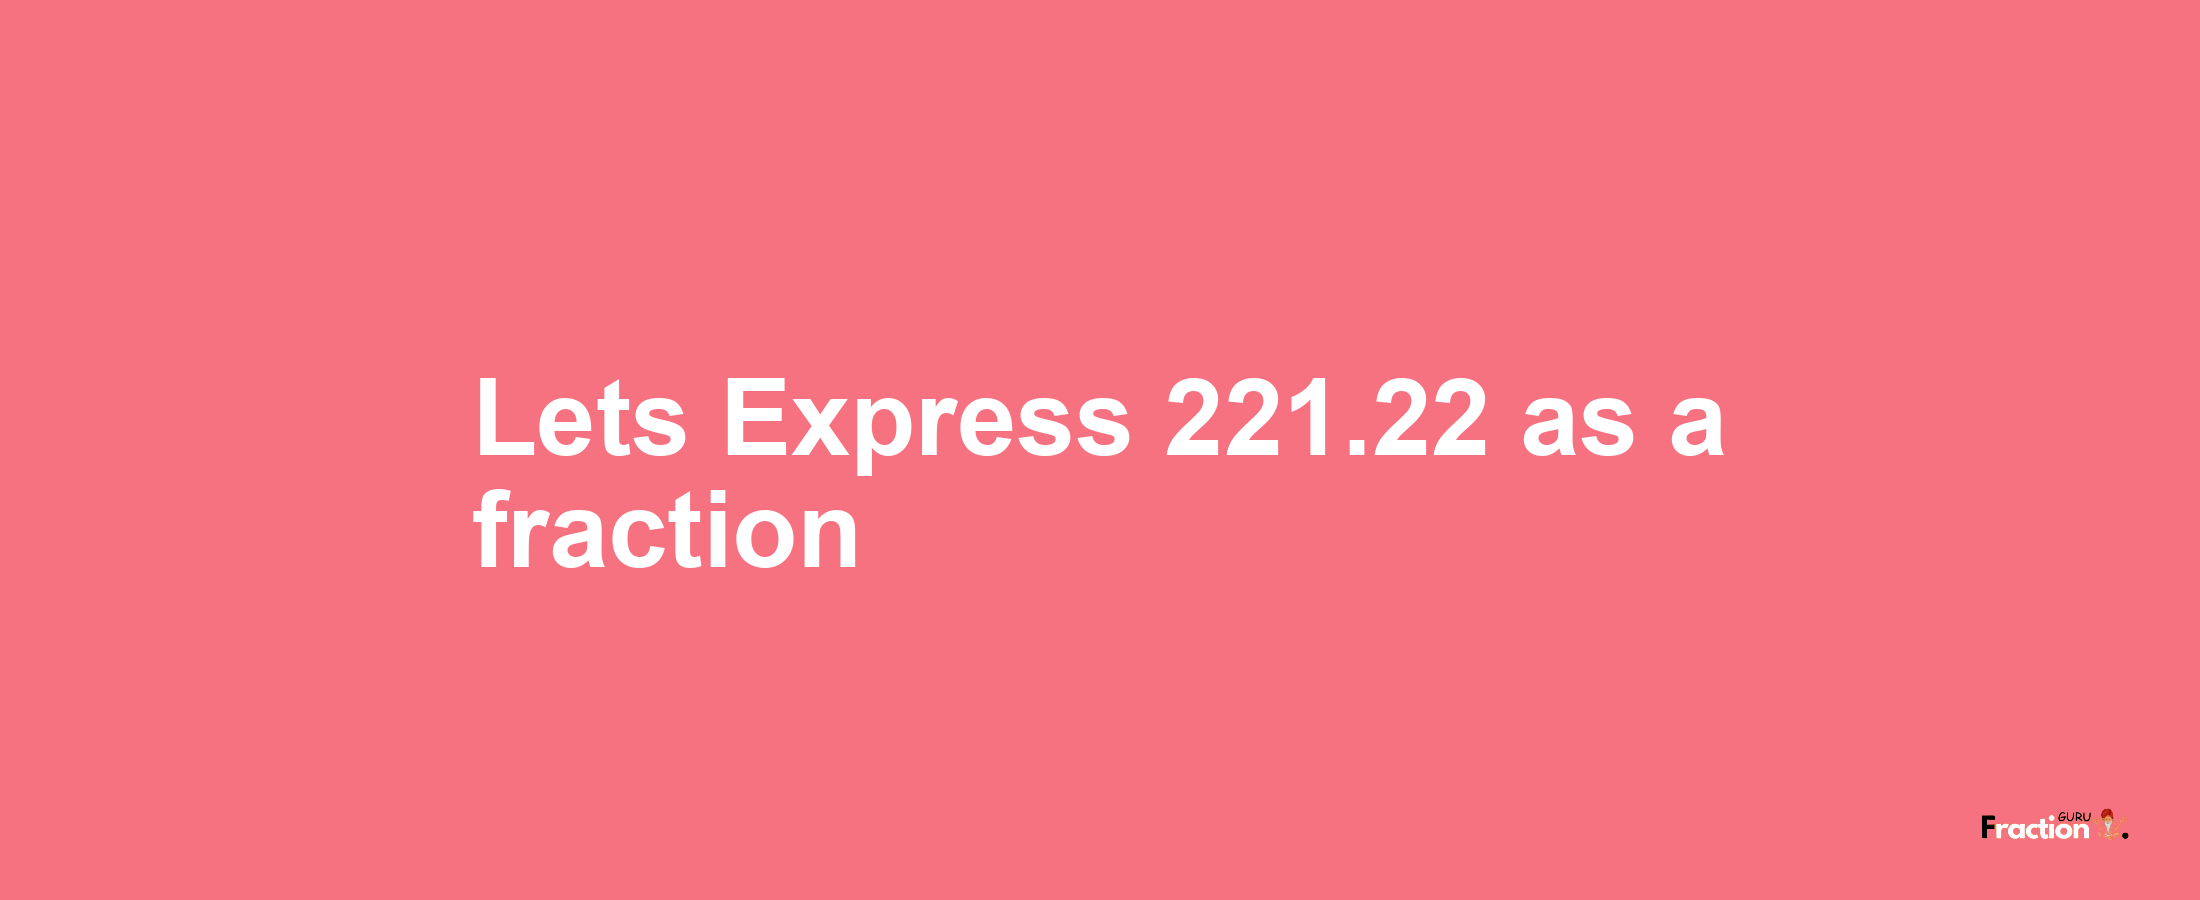 Lets Express 221.22 as afraction